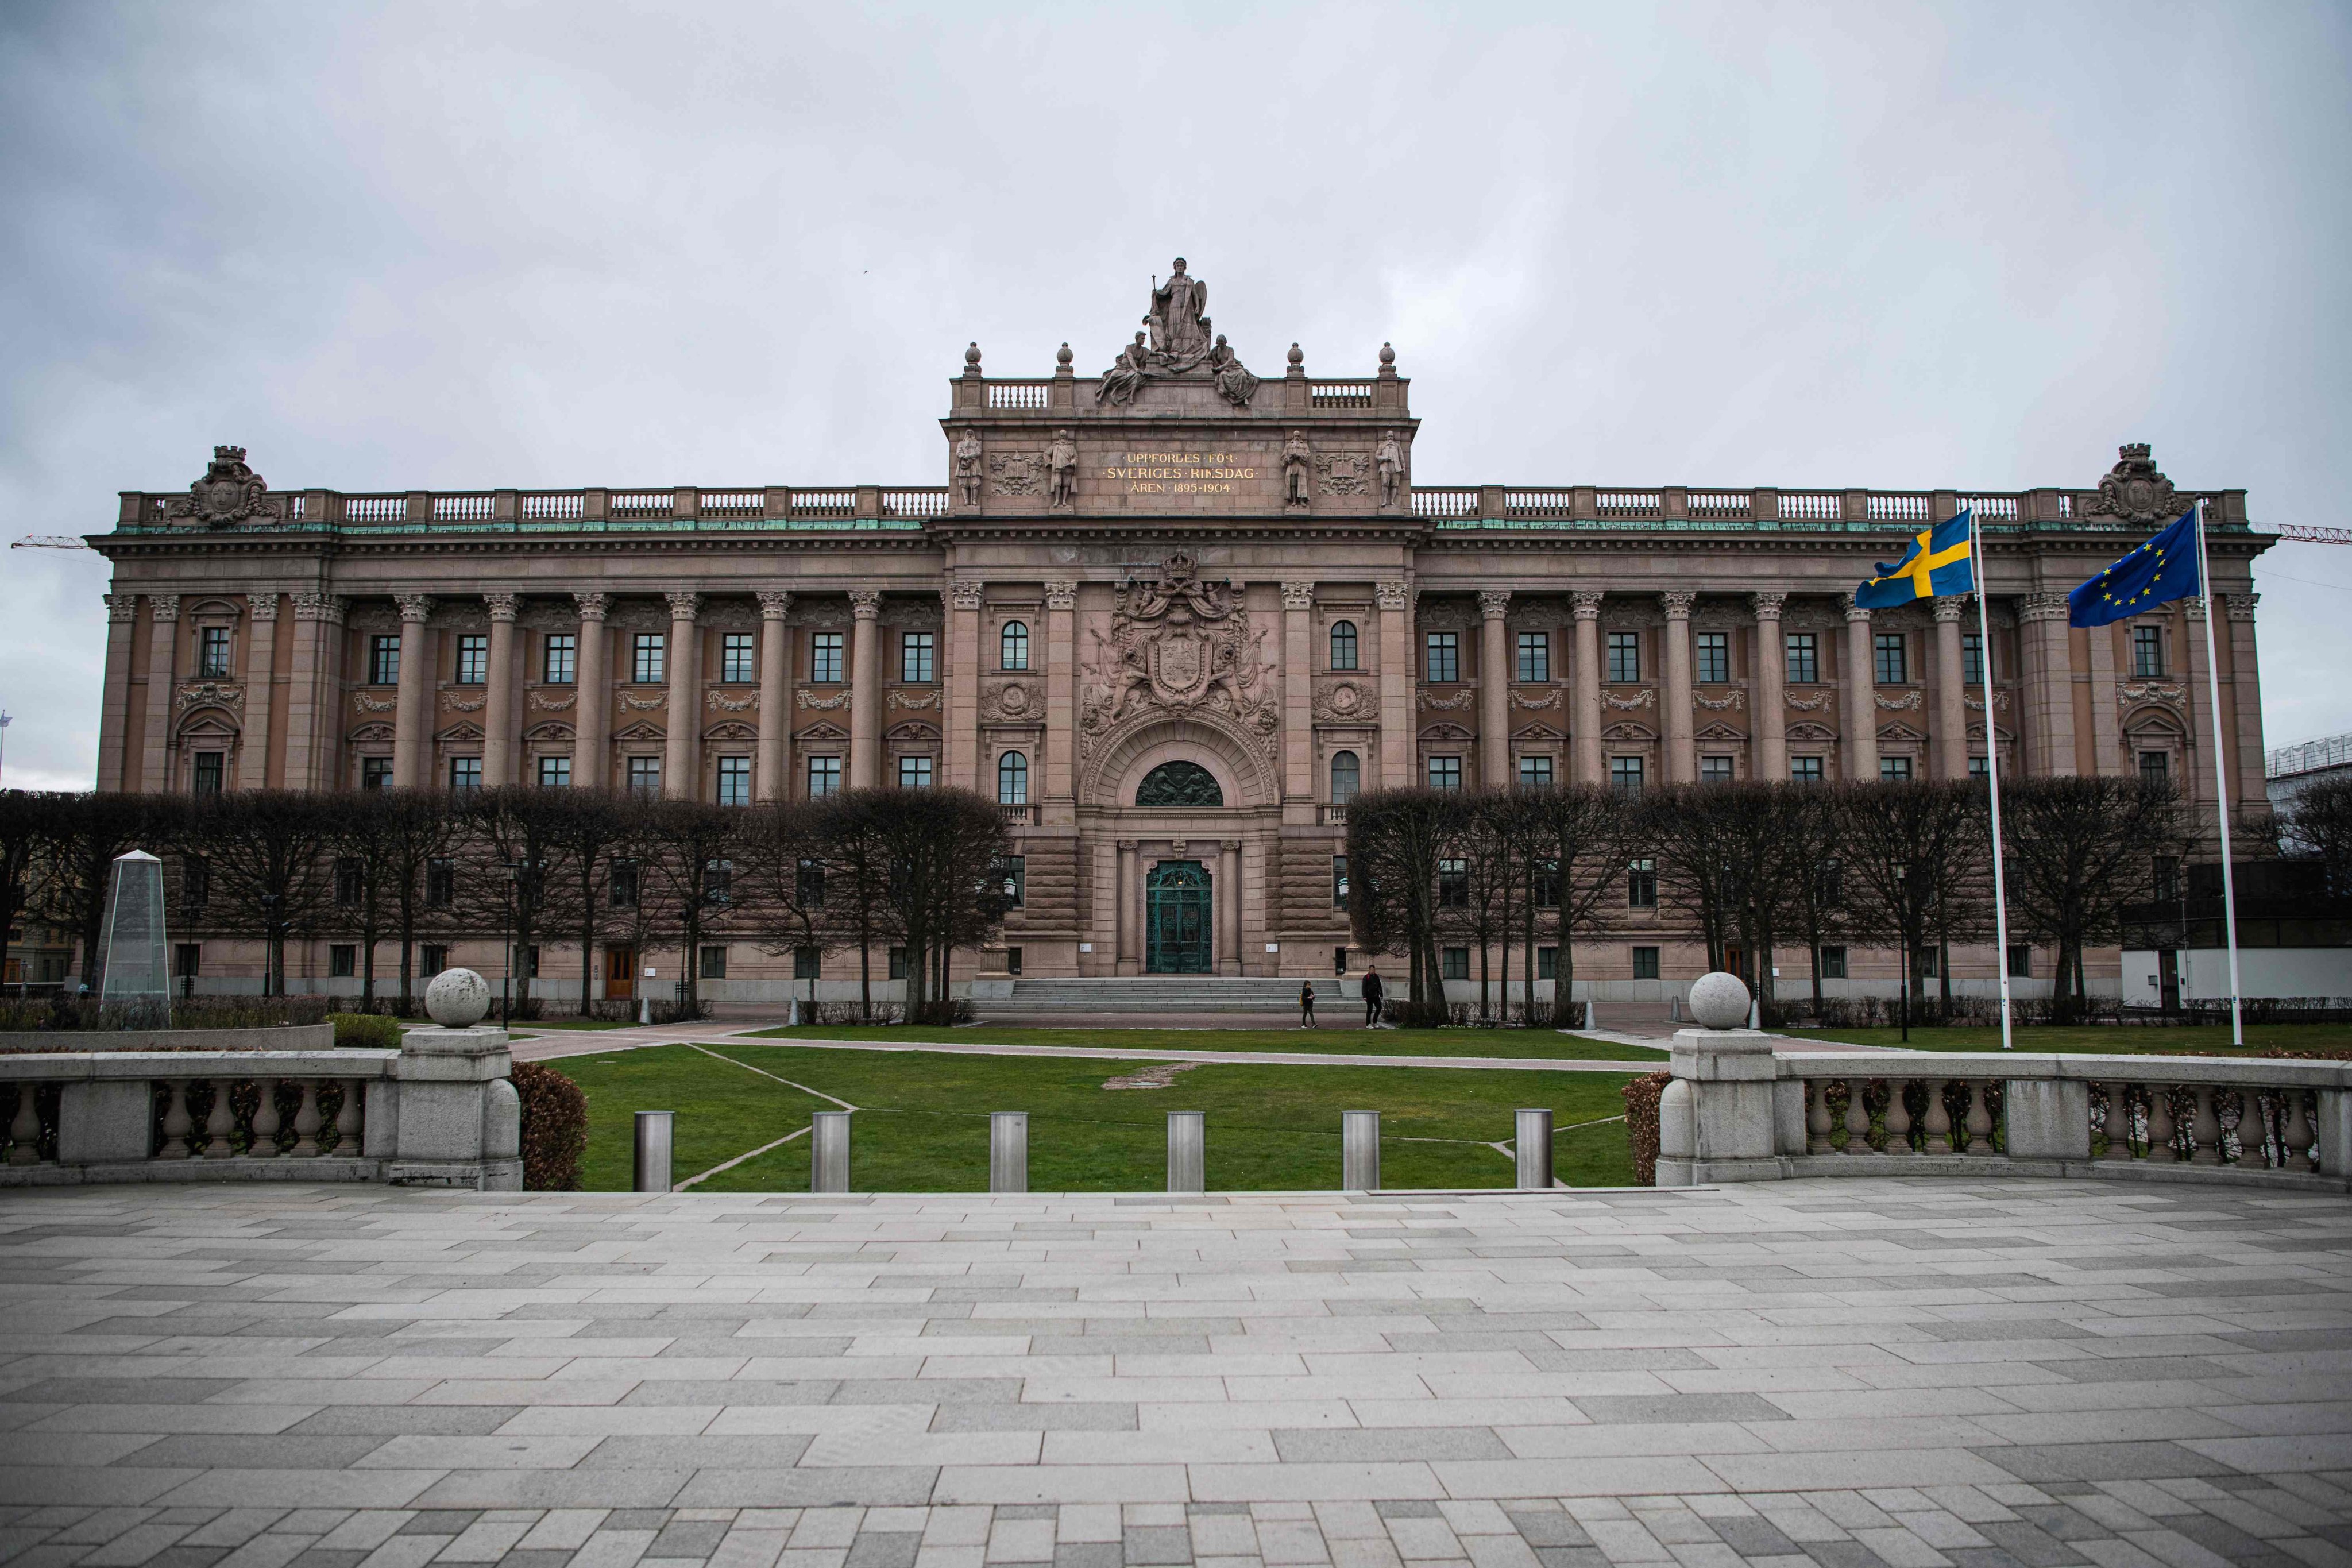 The Swedish and EU flags fly in front of the Swedish Parliament in Stockholm. Two Afghans linked to the Islamic State group were arrested in Germany on suspicion of planning an attack around Sweden’s parliament in retaliation for Koran burnings, prosecutors said. Photo: AFP